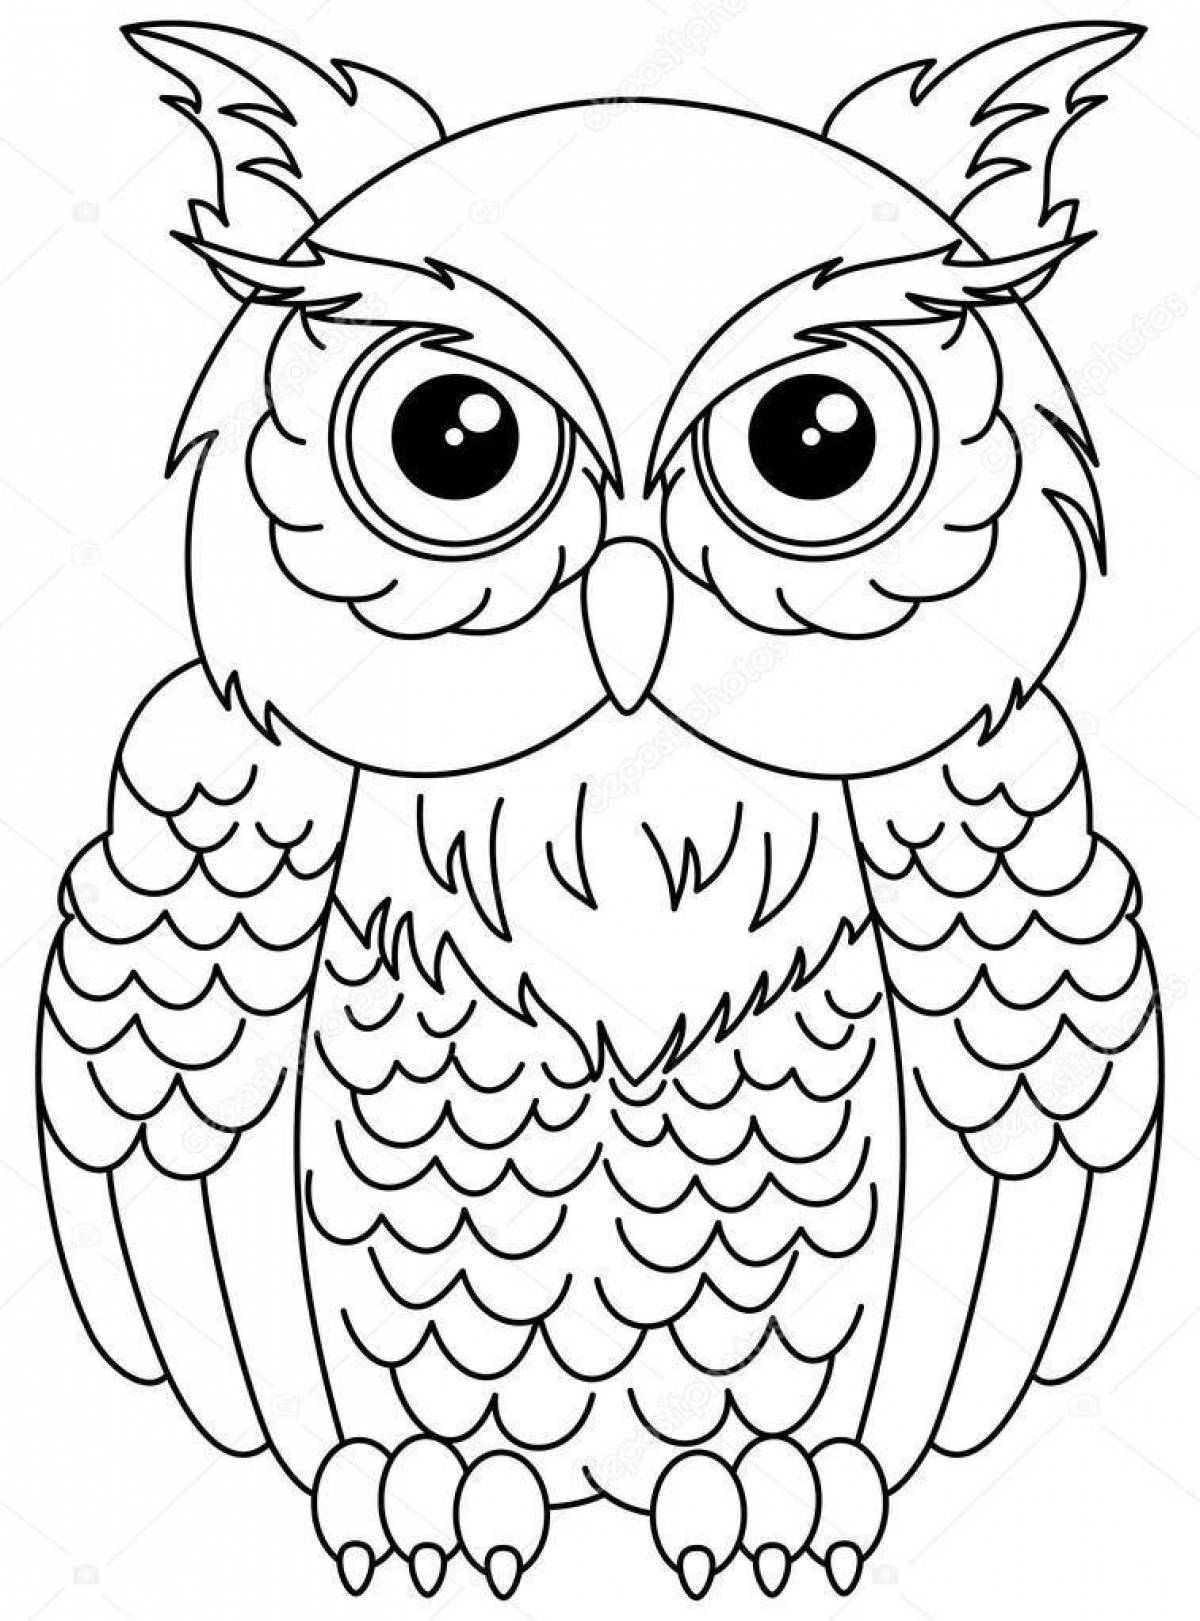 Great white owl coloring book